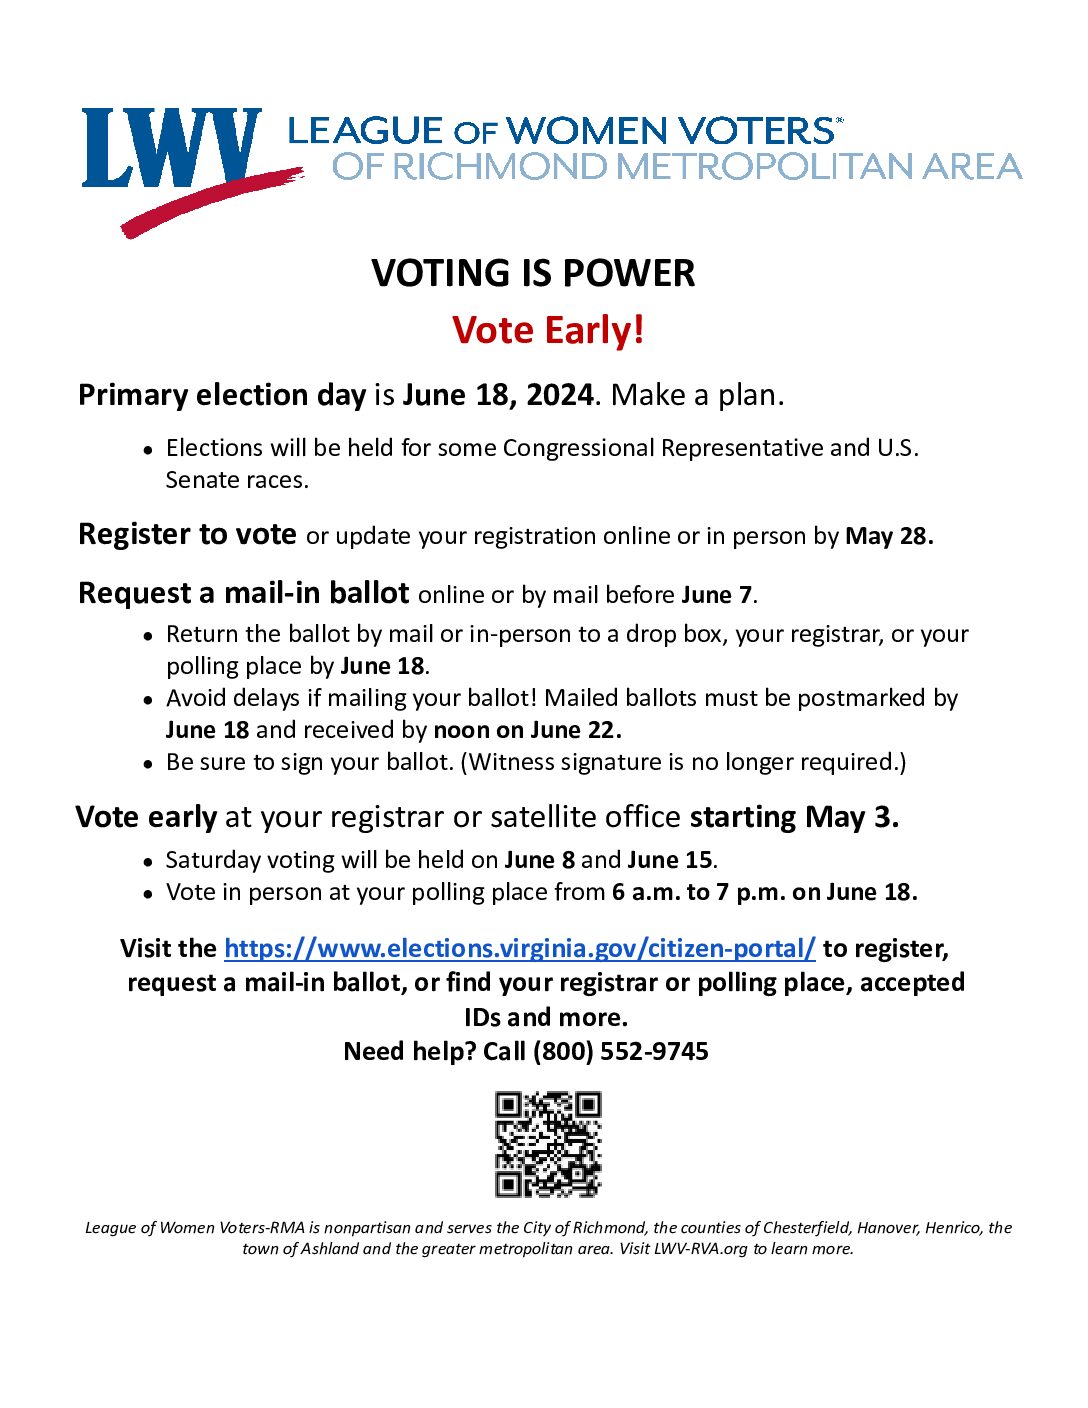 We have a Primary Election June 18th. Get the facts here. Share with all!